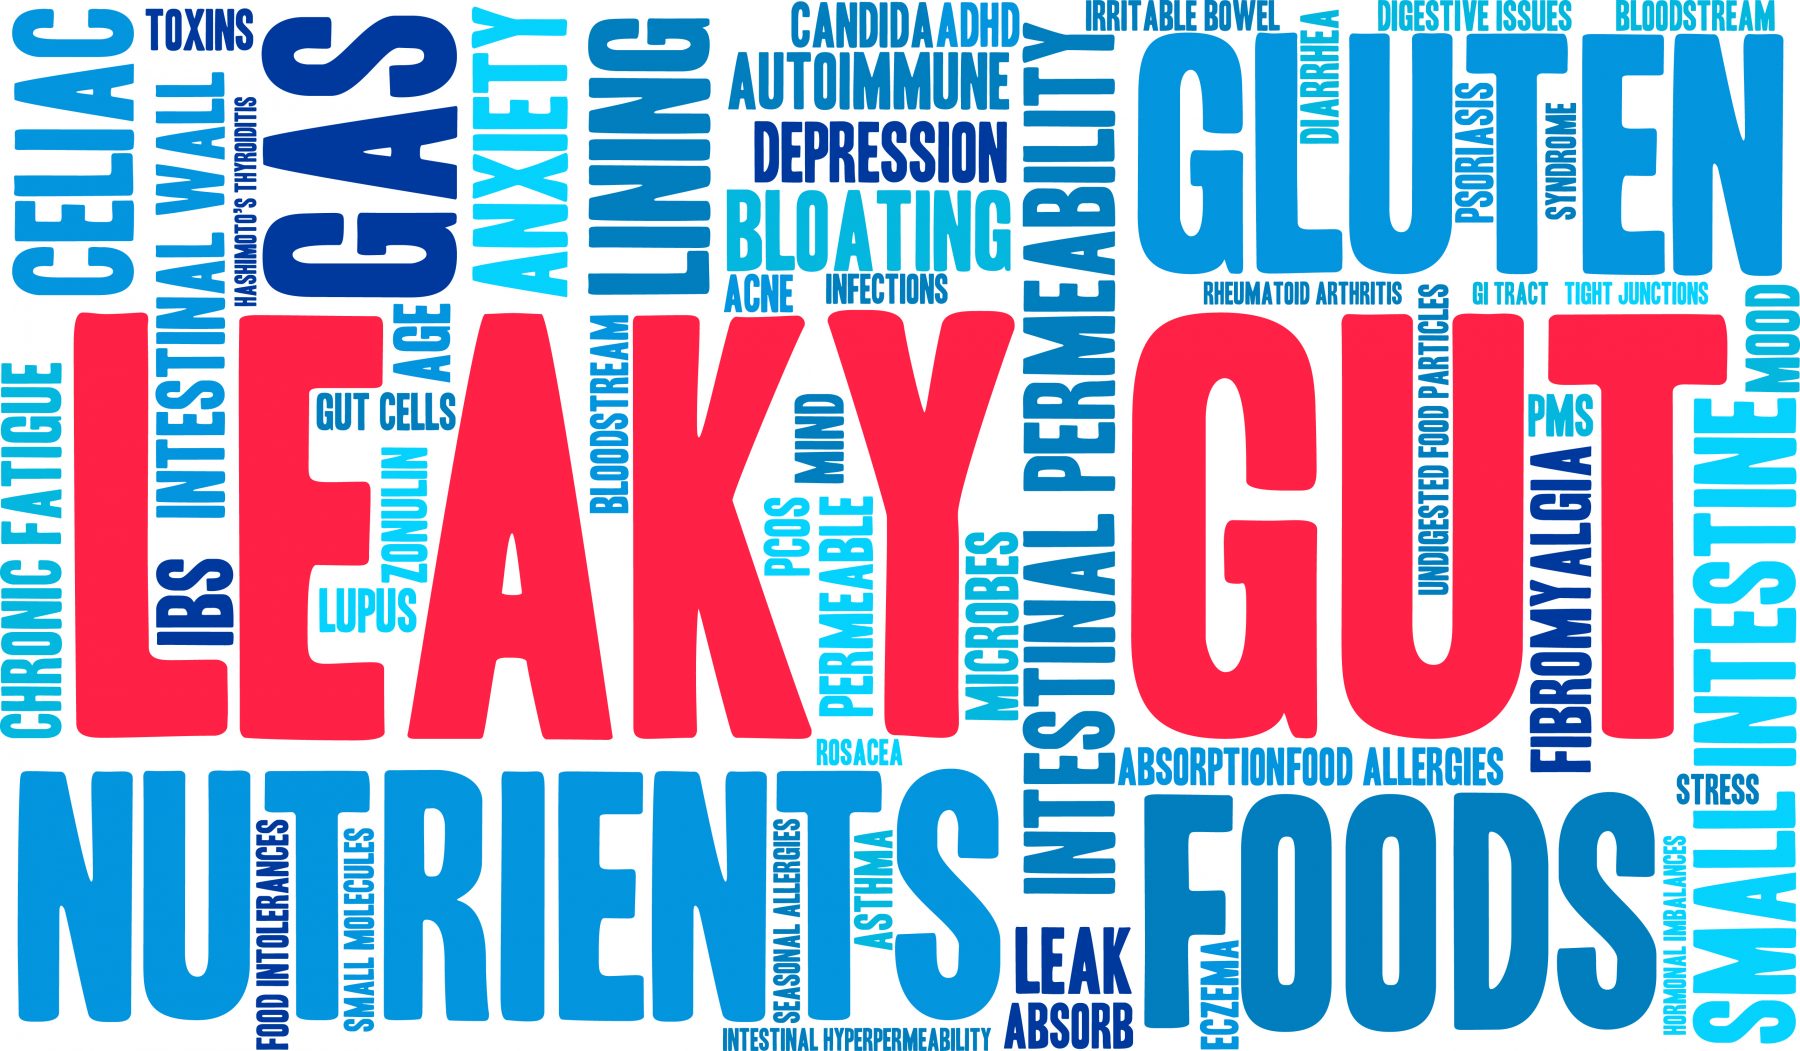 EP 12: Treatment Strategies for Leaky Gut Syndrome